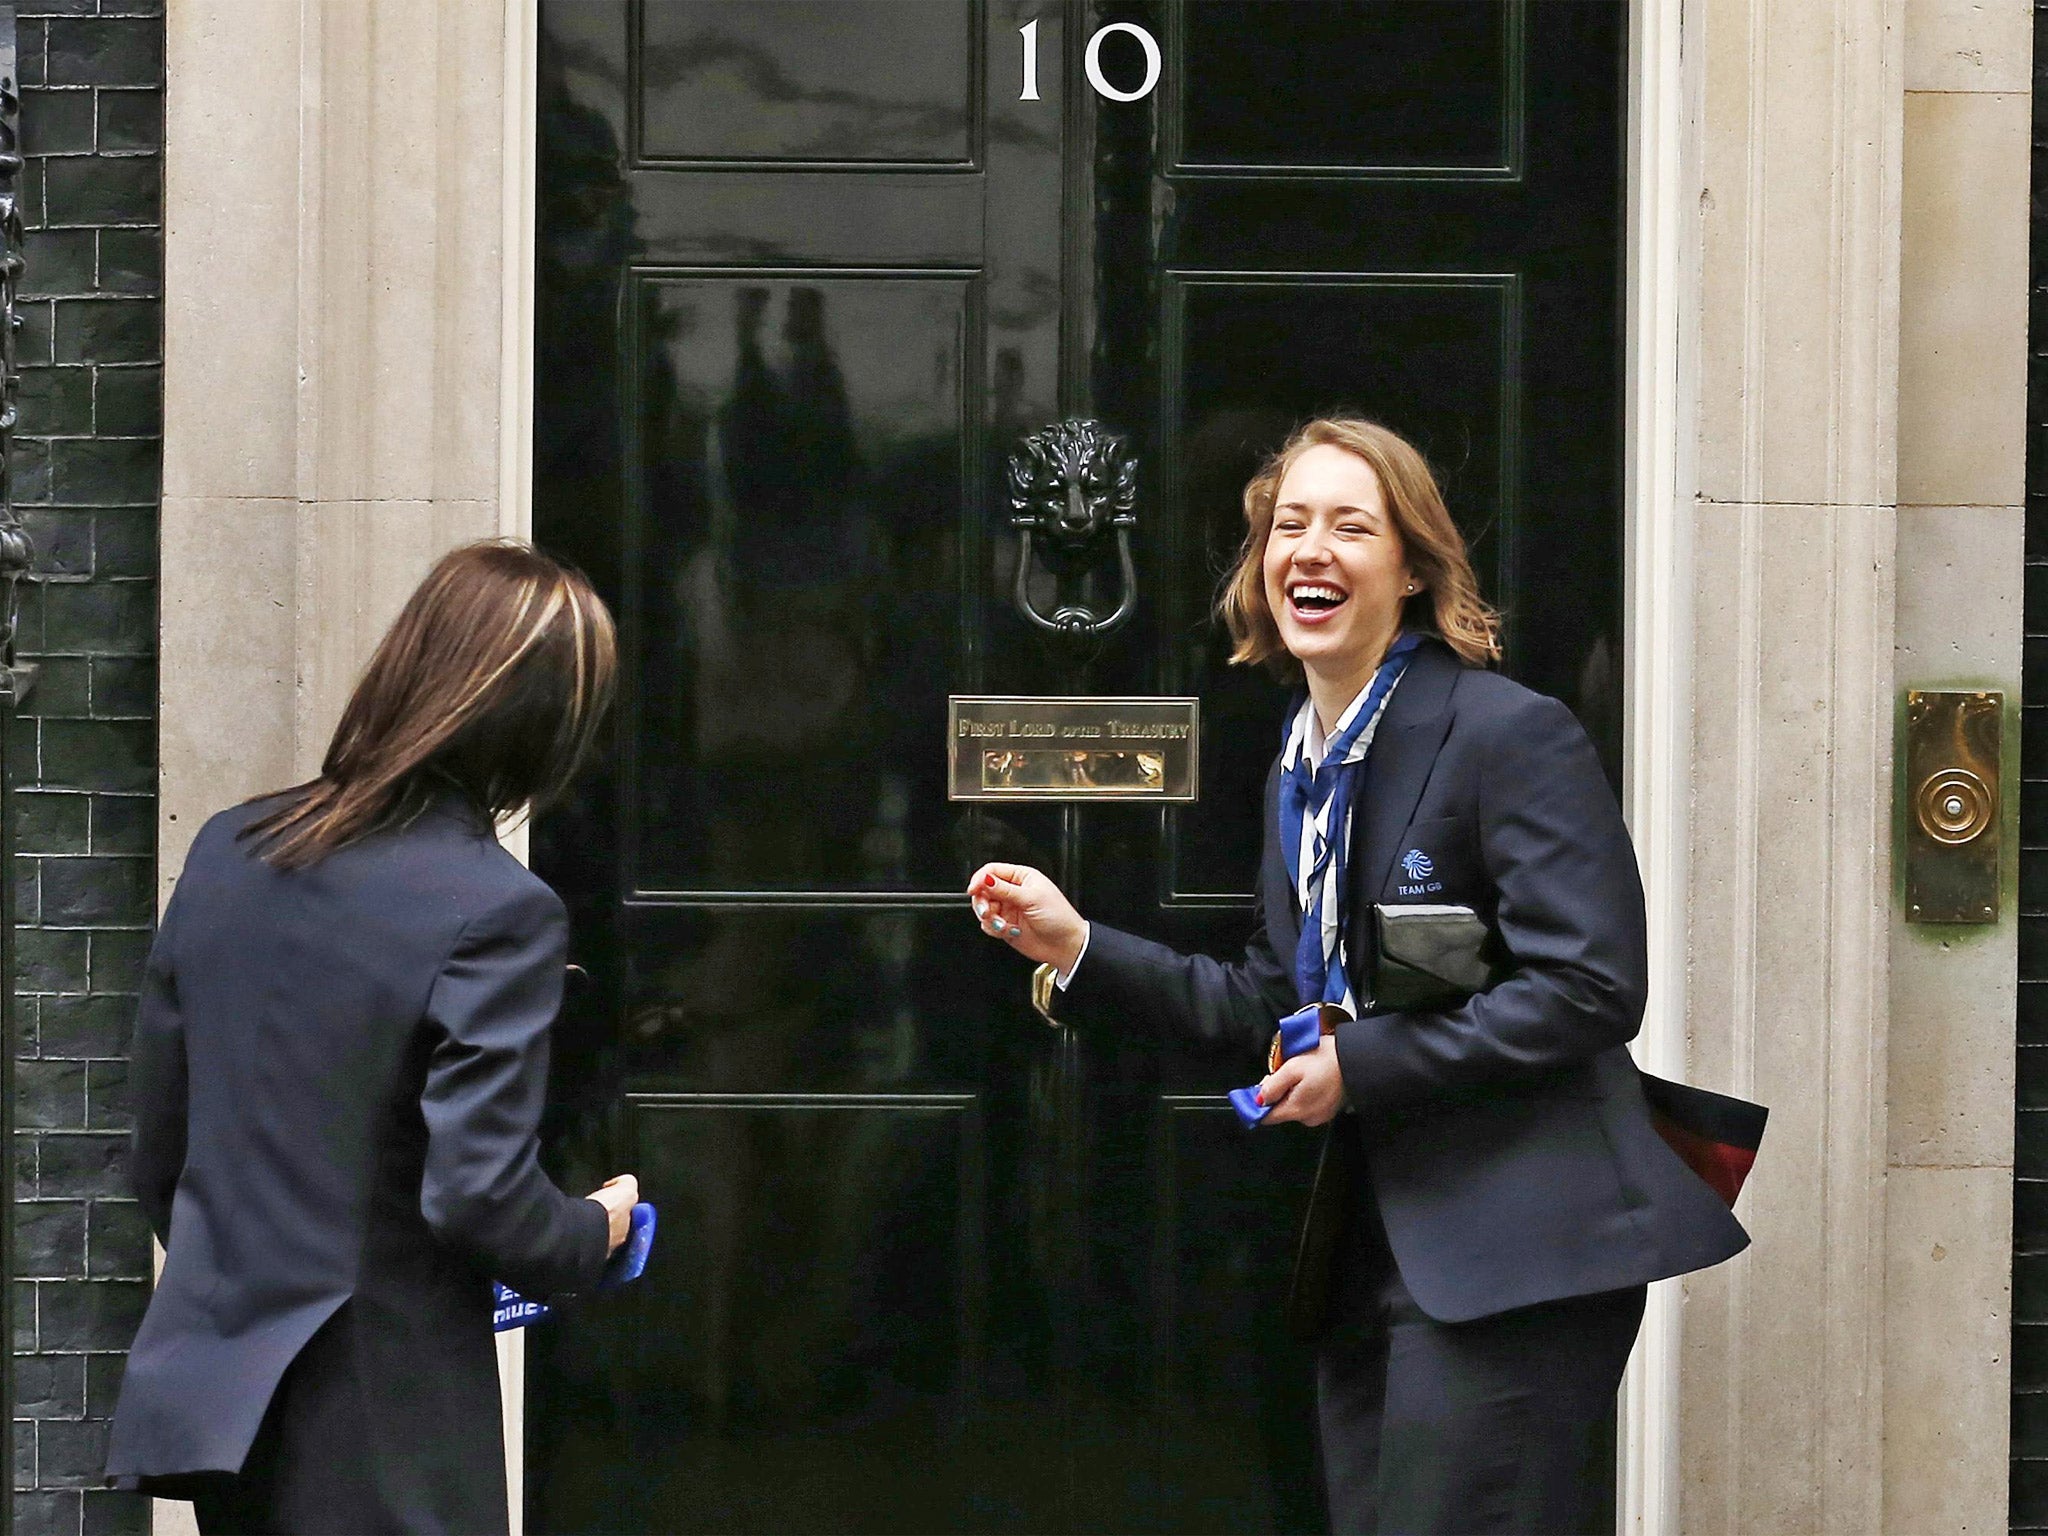 Lizzy Yarnold (right) jokes with curling skip Eve Muirhead in Downing Street